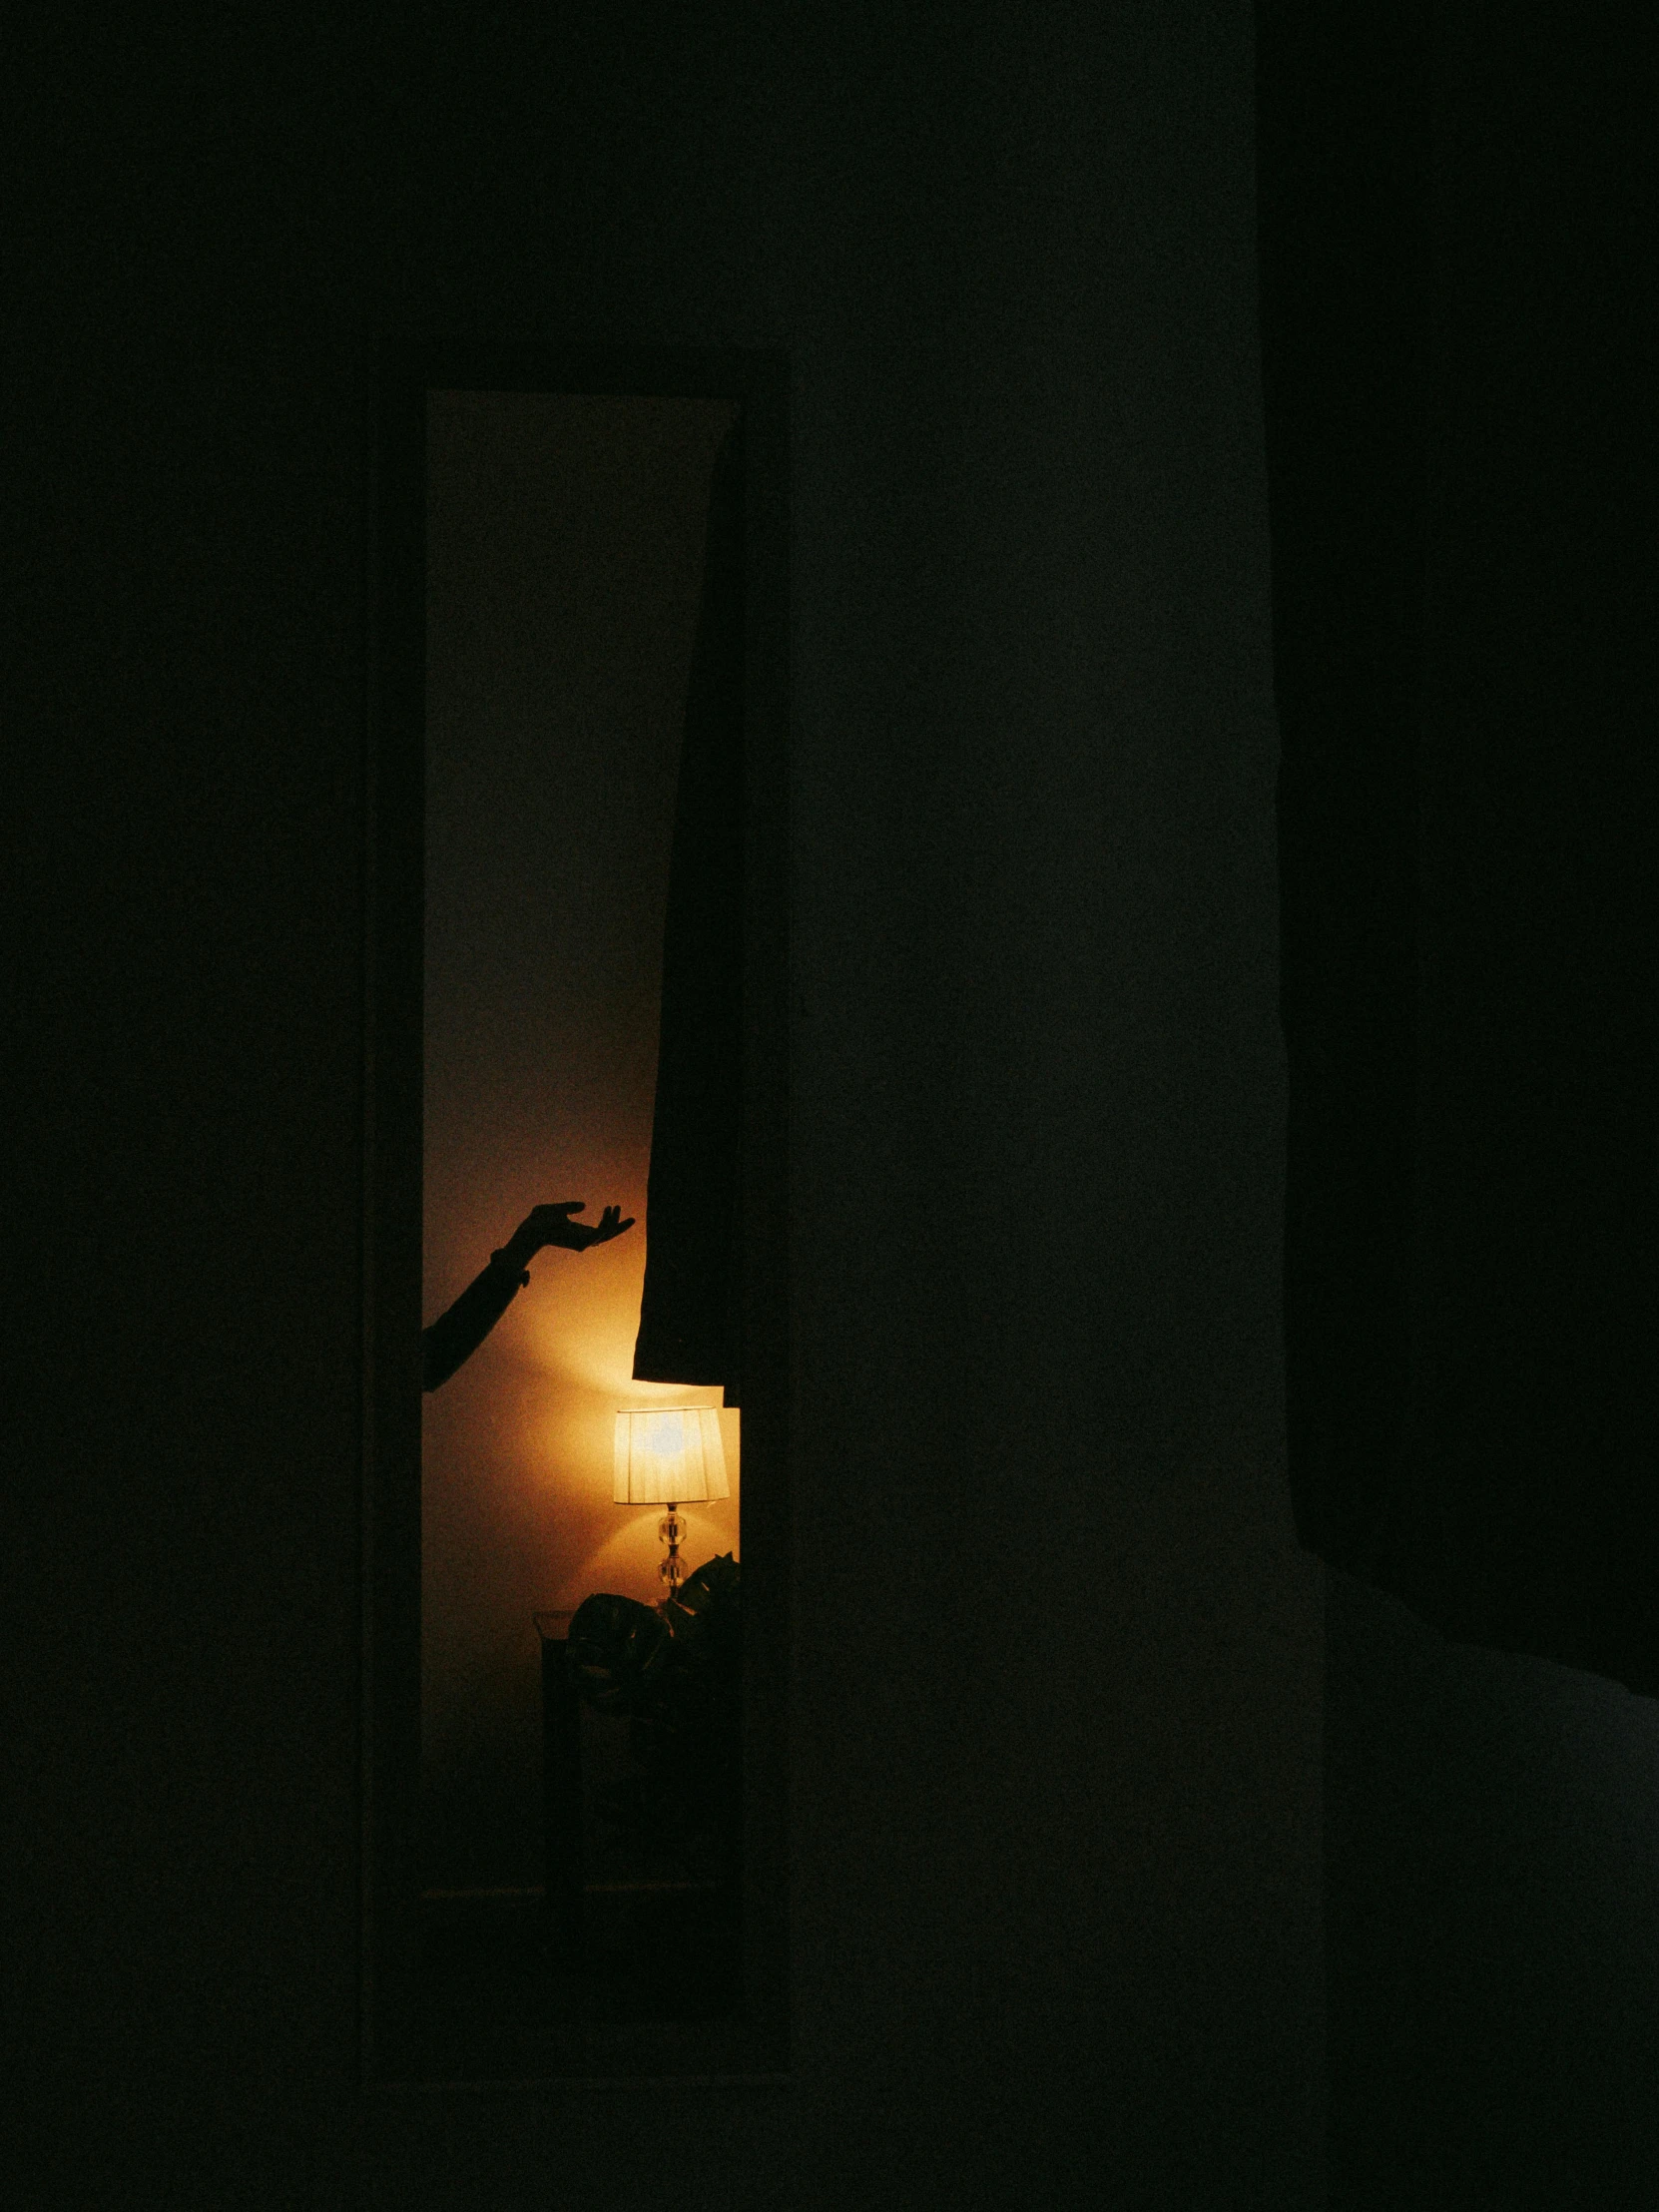 a person standing in front of a lamp in the dark